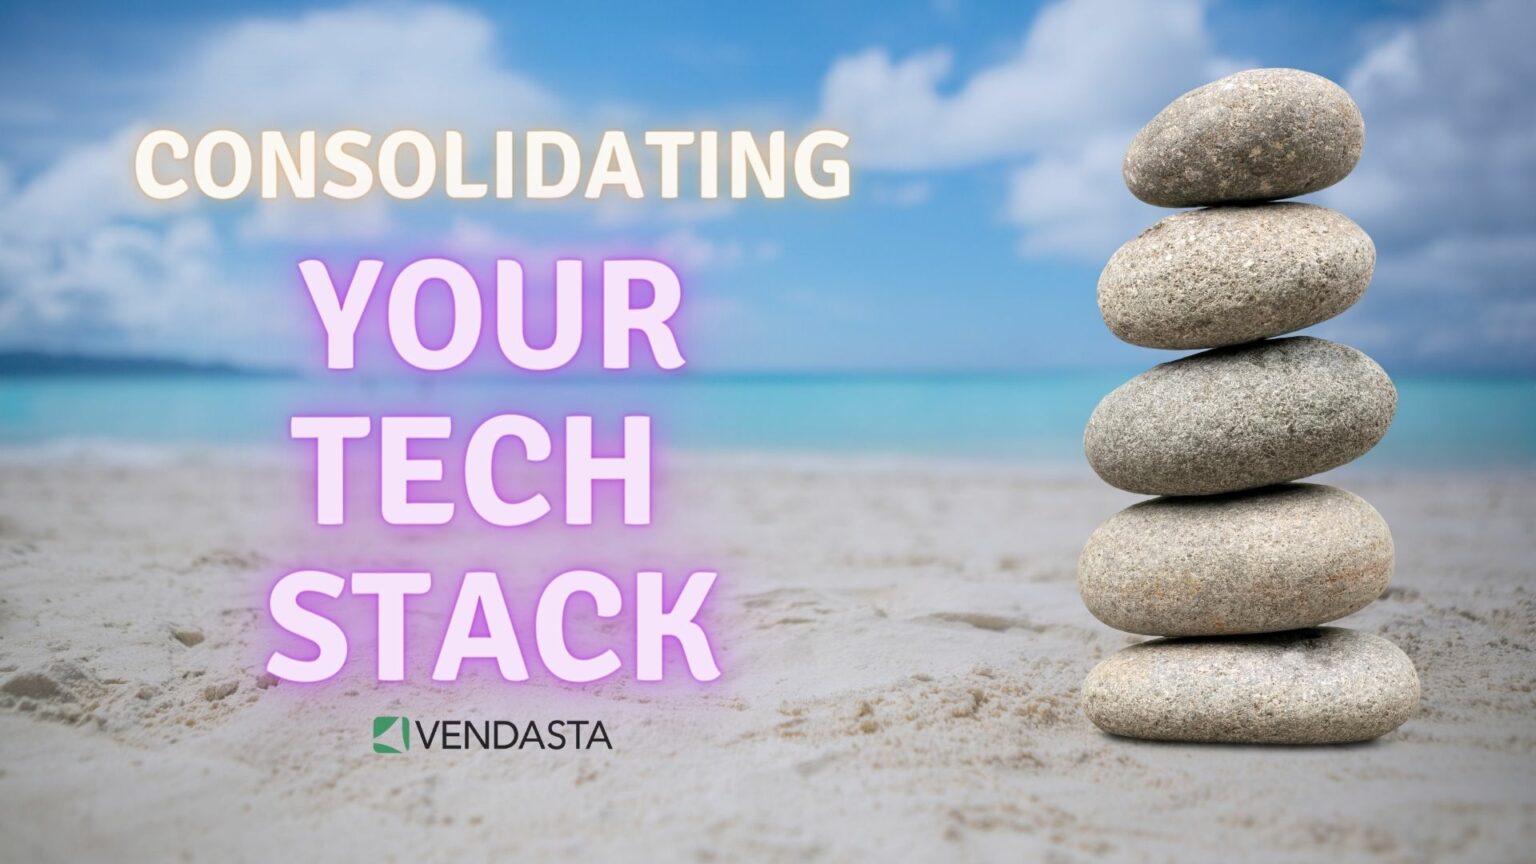 5 Benefits to Consolidating Your Tech Stack